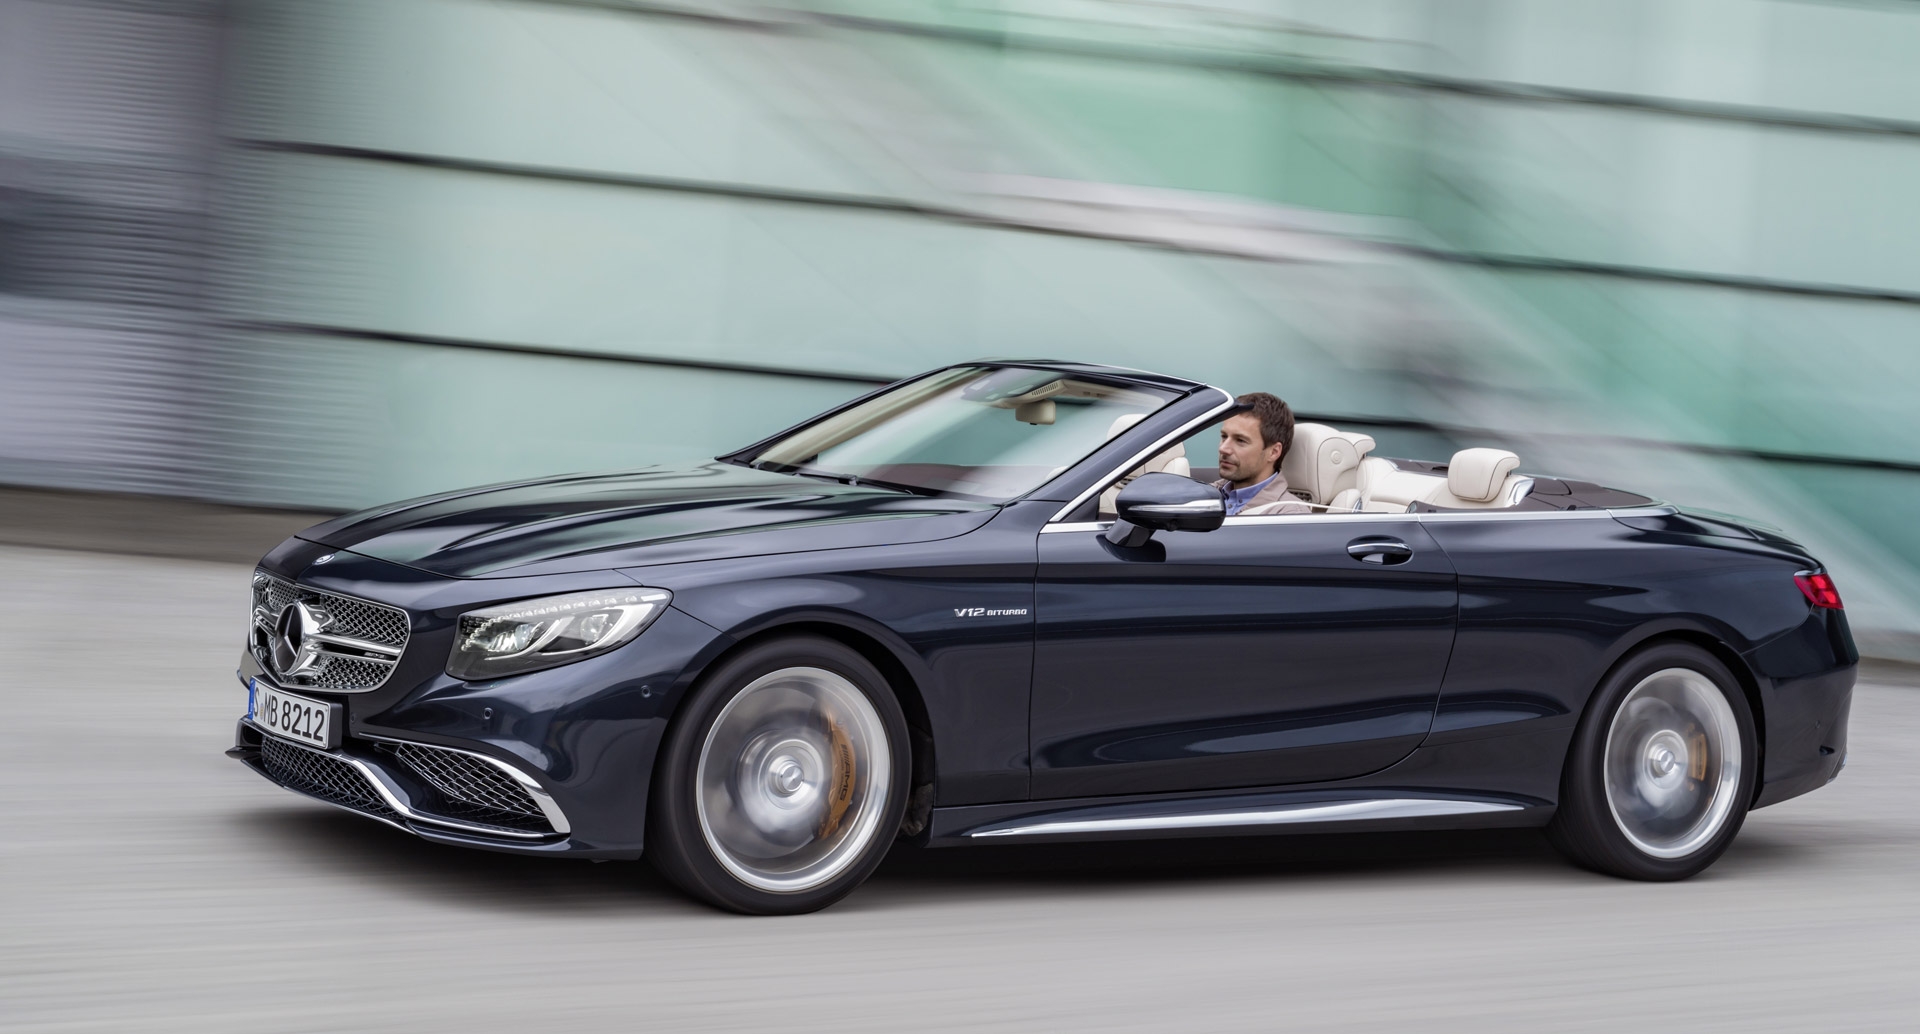 2018 MercedesAMG S65 Cabriolet Review release date 1920 X 1034